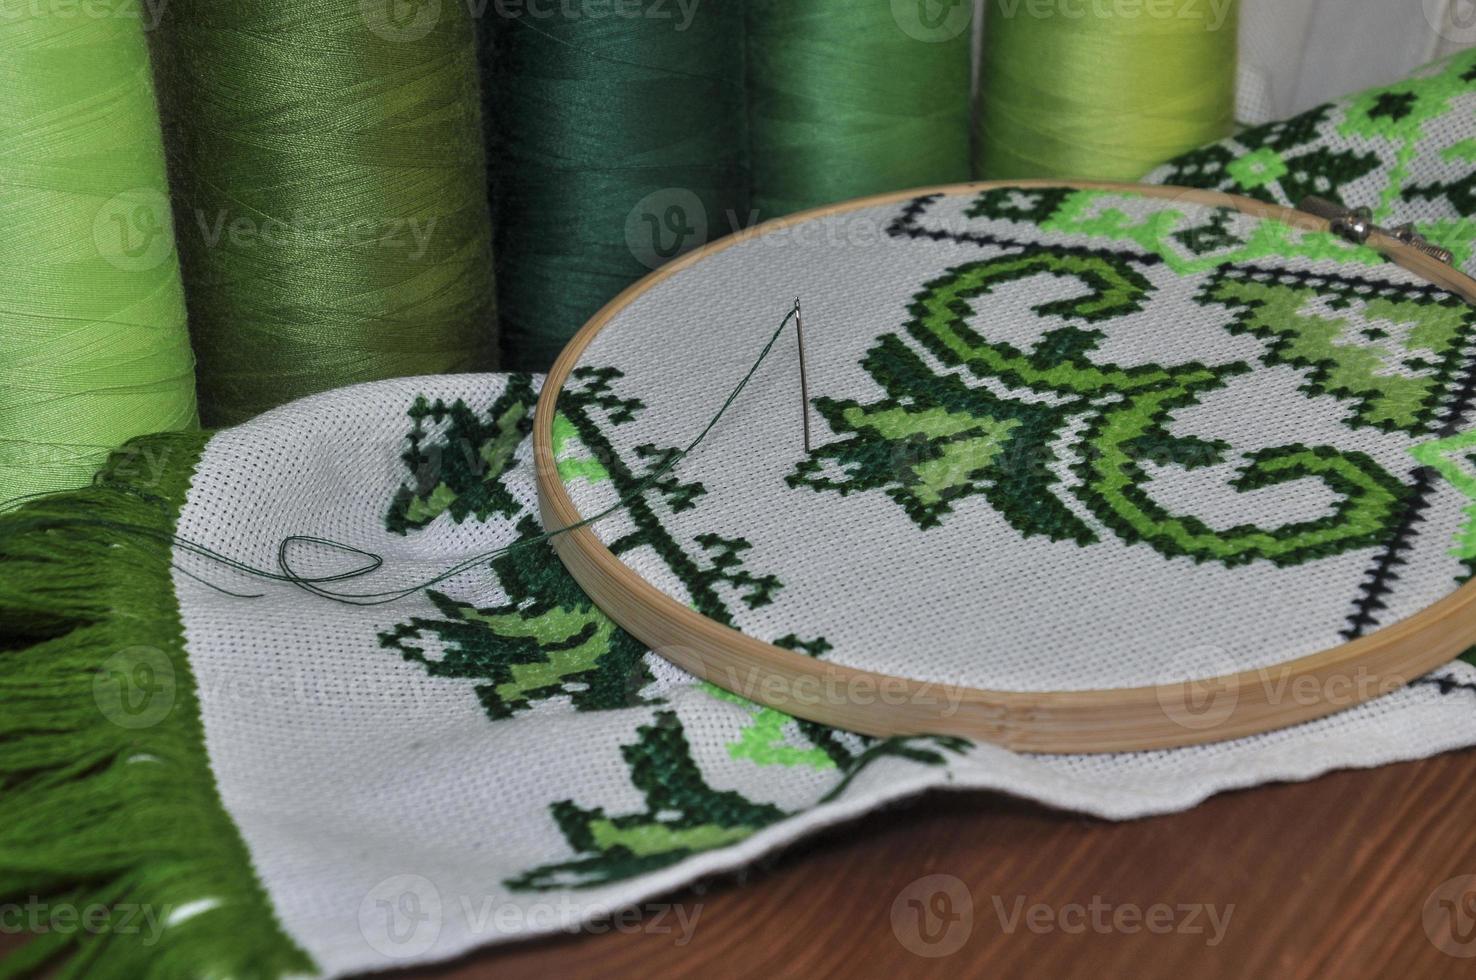 The embroidery hoop with canvas and bright sewing threads for embroidery in the table photo